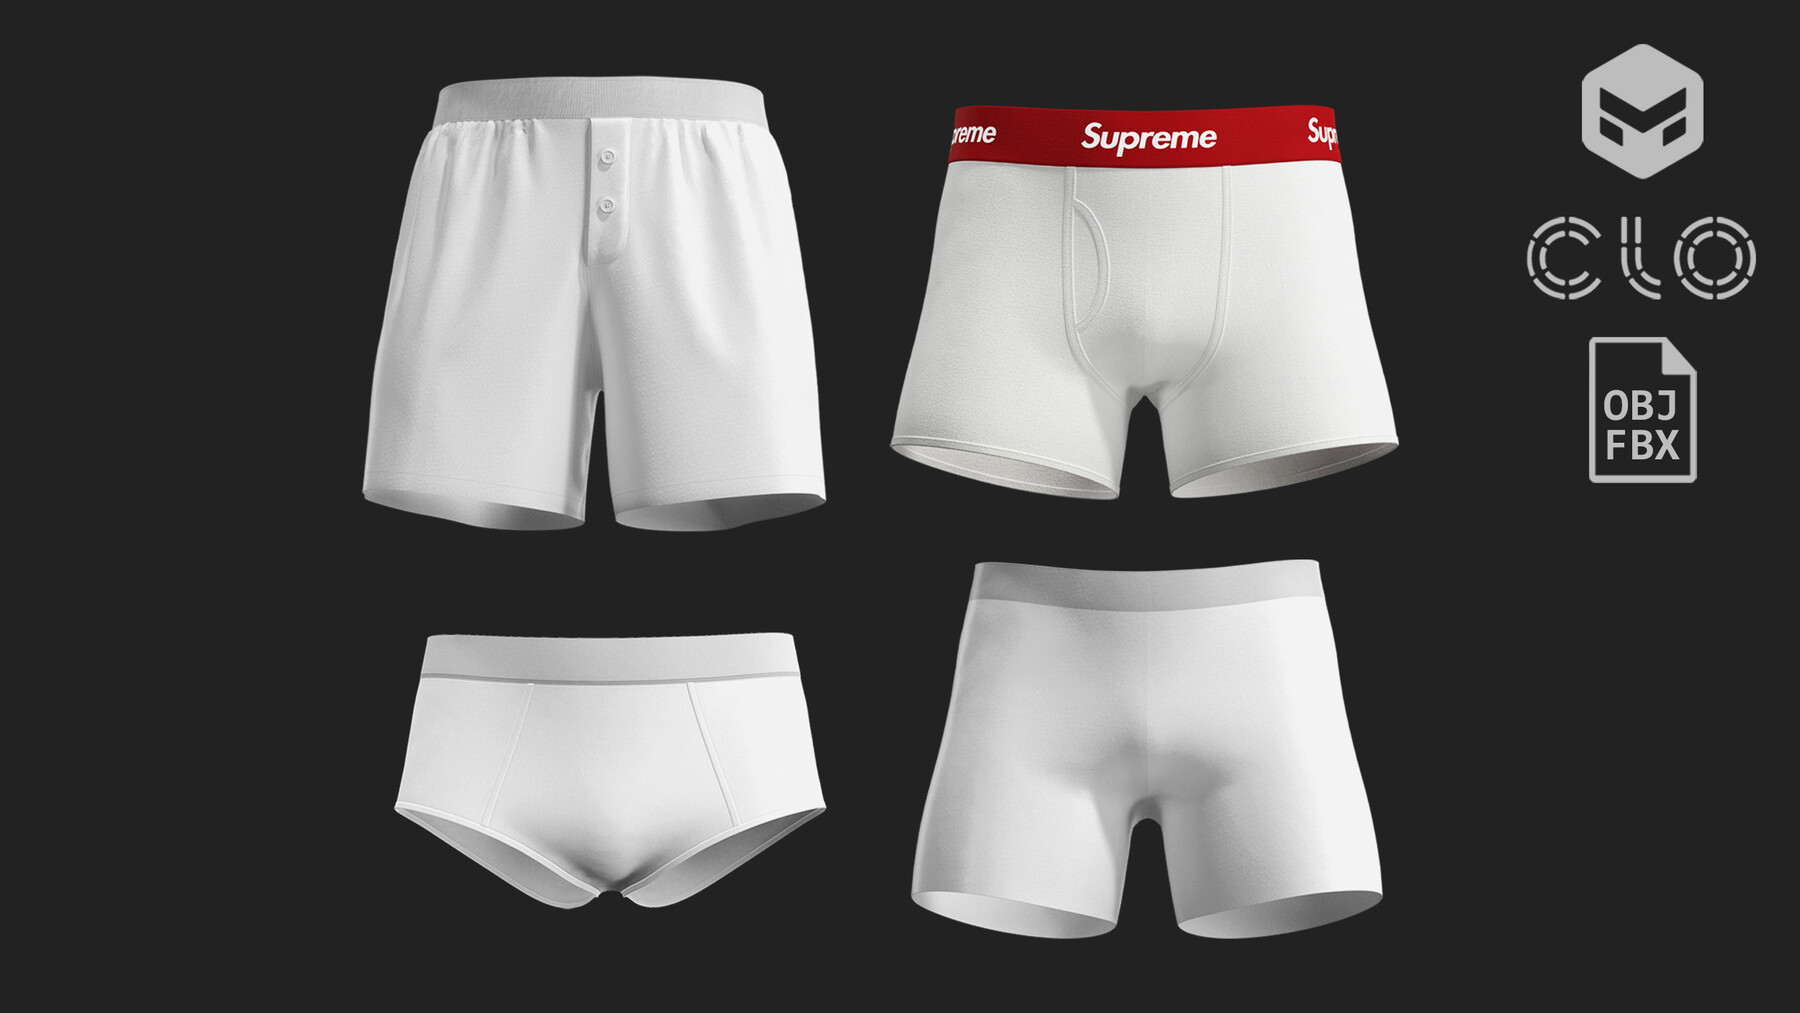 806 Skinny Male Underwear Images, Stock Photos, 3D objects, & Vectors